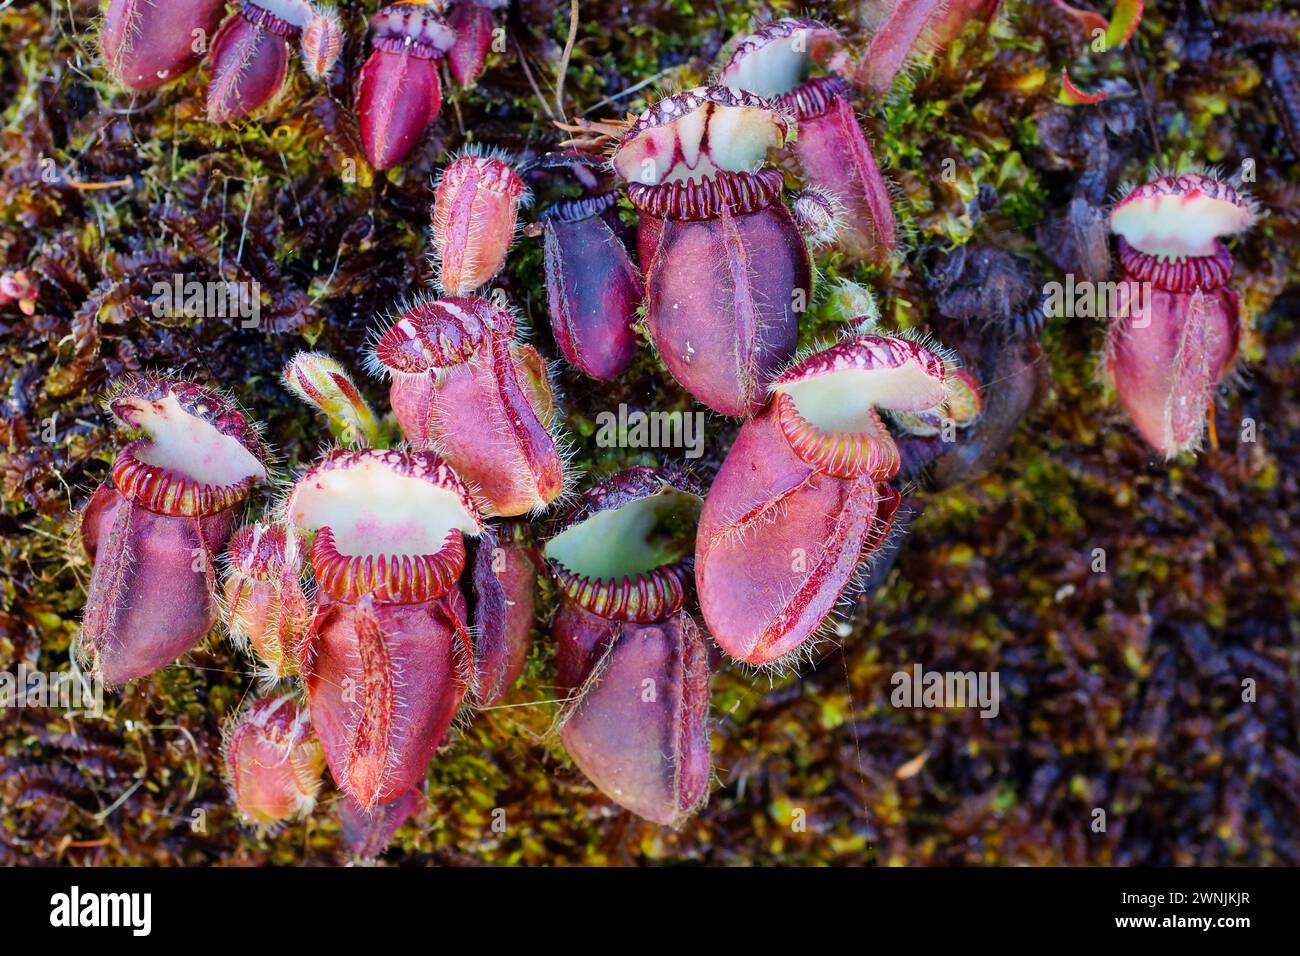 Red pitchers of the Albany pitcher plant (Cephalotus follicularis), growing in mossy soil in natural habitat, Western Australia Stock Photo